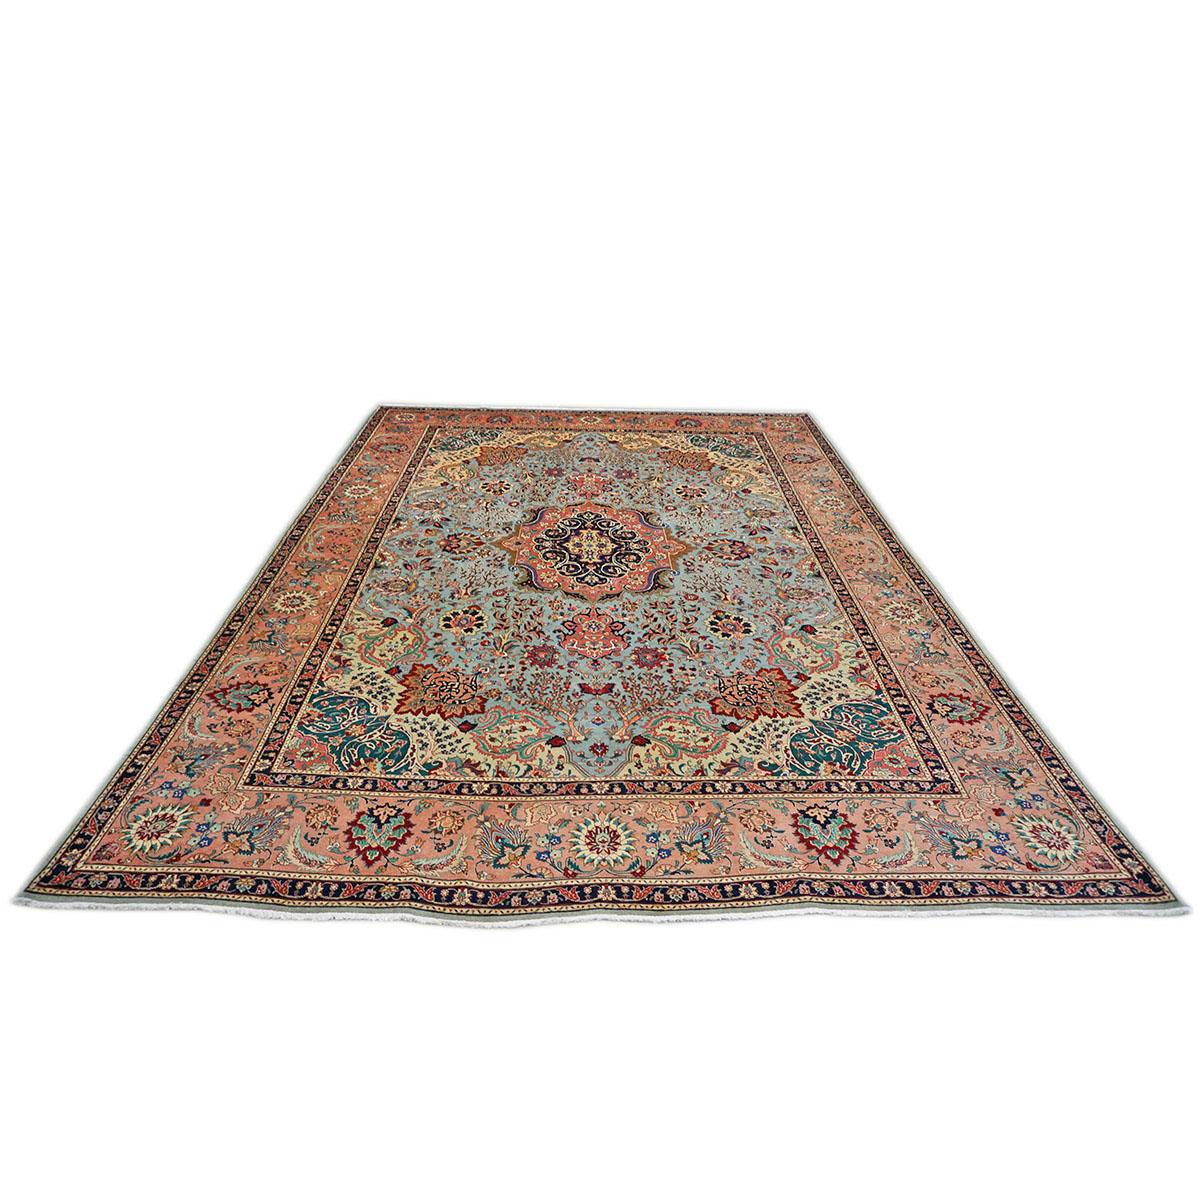 A fine woven 1940s Persian Tabriz with a light blue field populated with fine detailed medallion floral designs.
Accent colors include green, taupe, salmon, and light blue.
The rug is bounded by a navy blue and light salmon floral border.